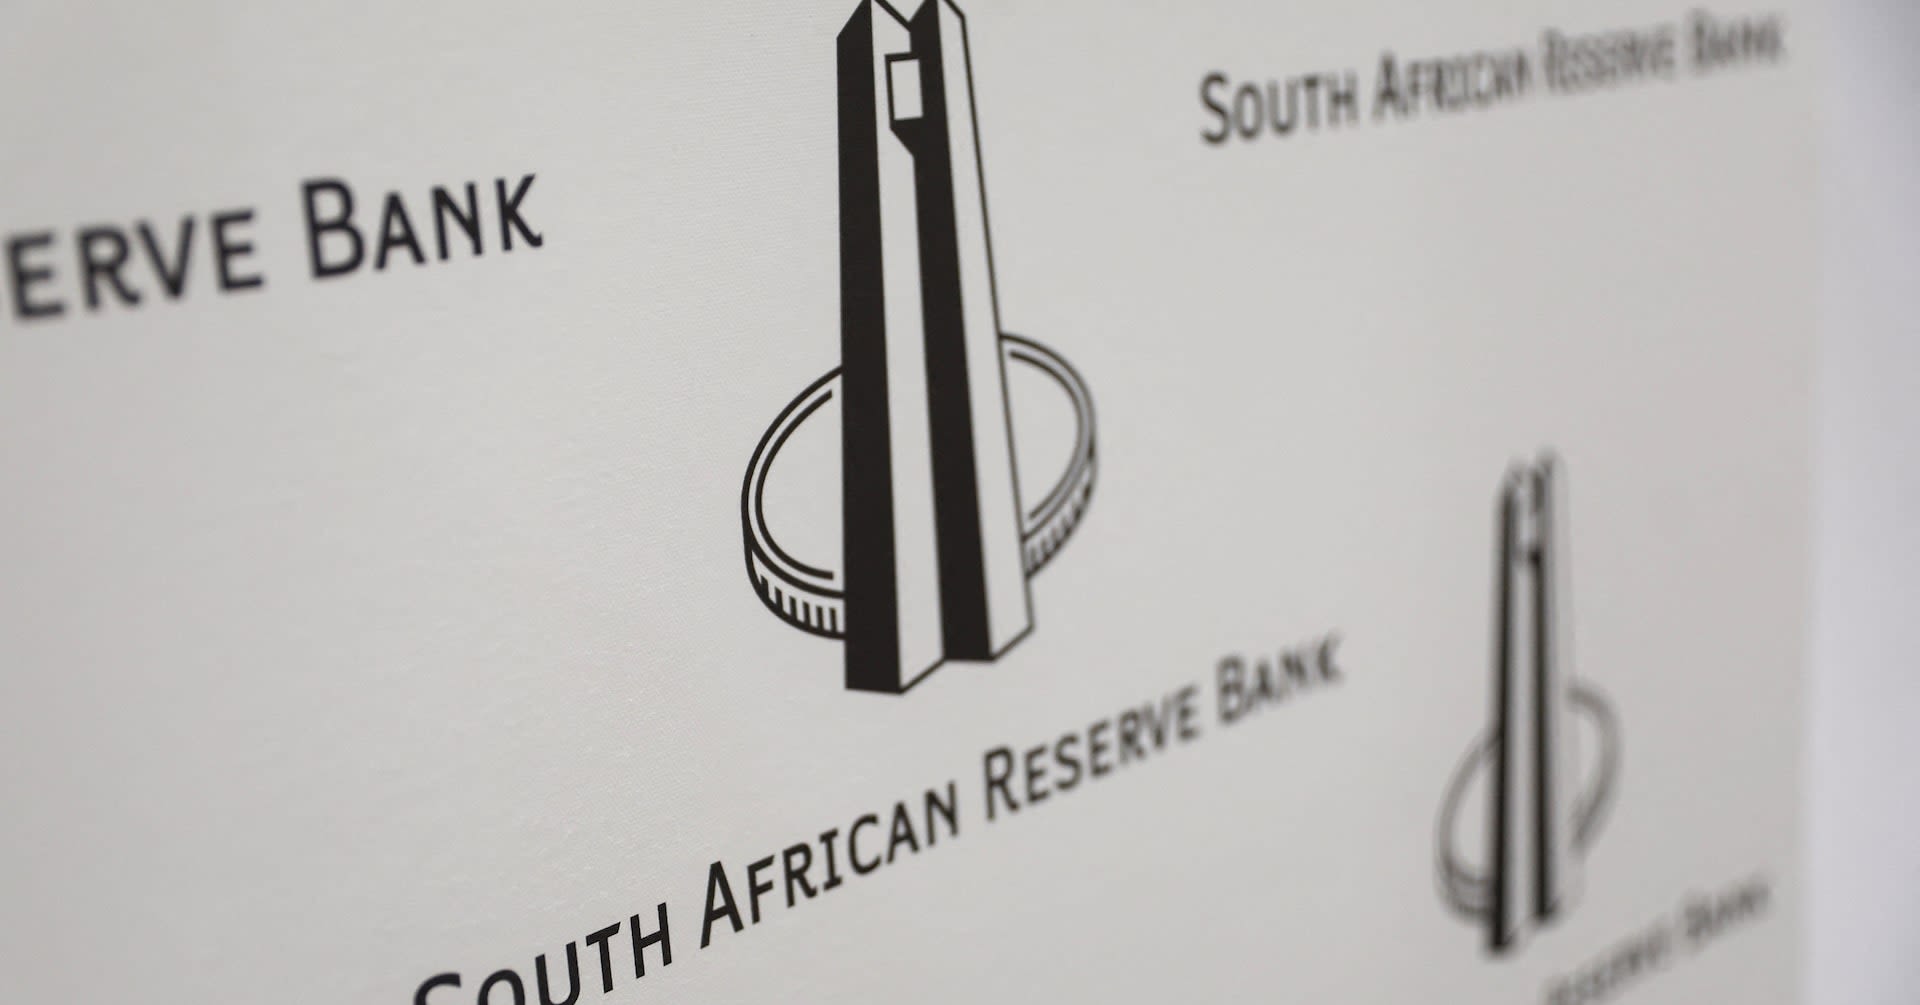 South Africa's financial system stable despite headwinds, central bank says